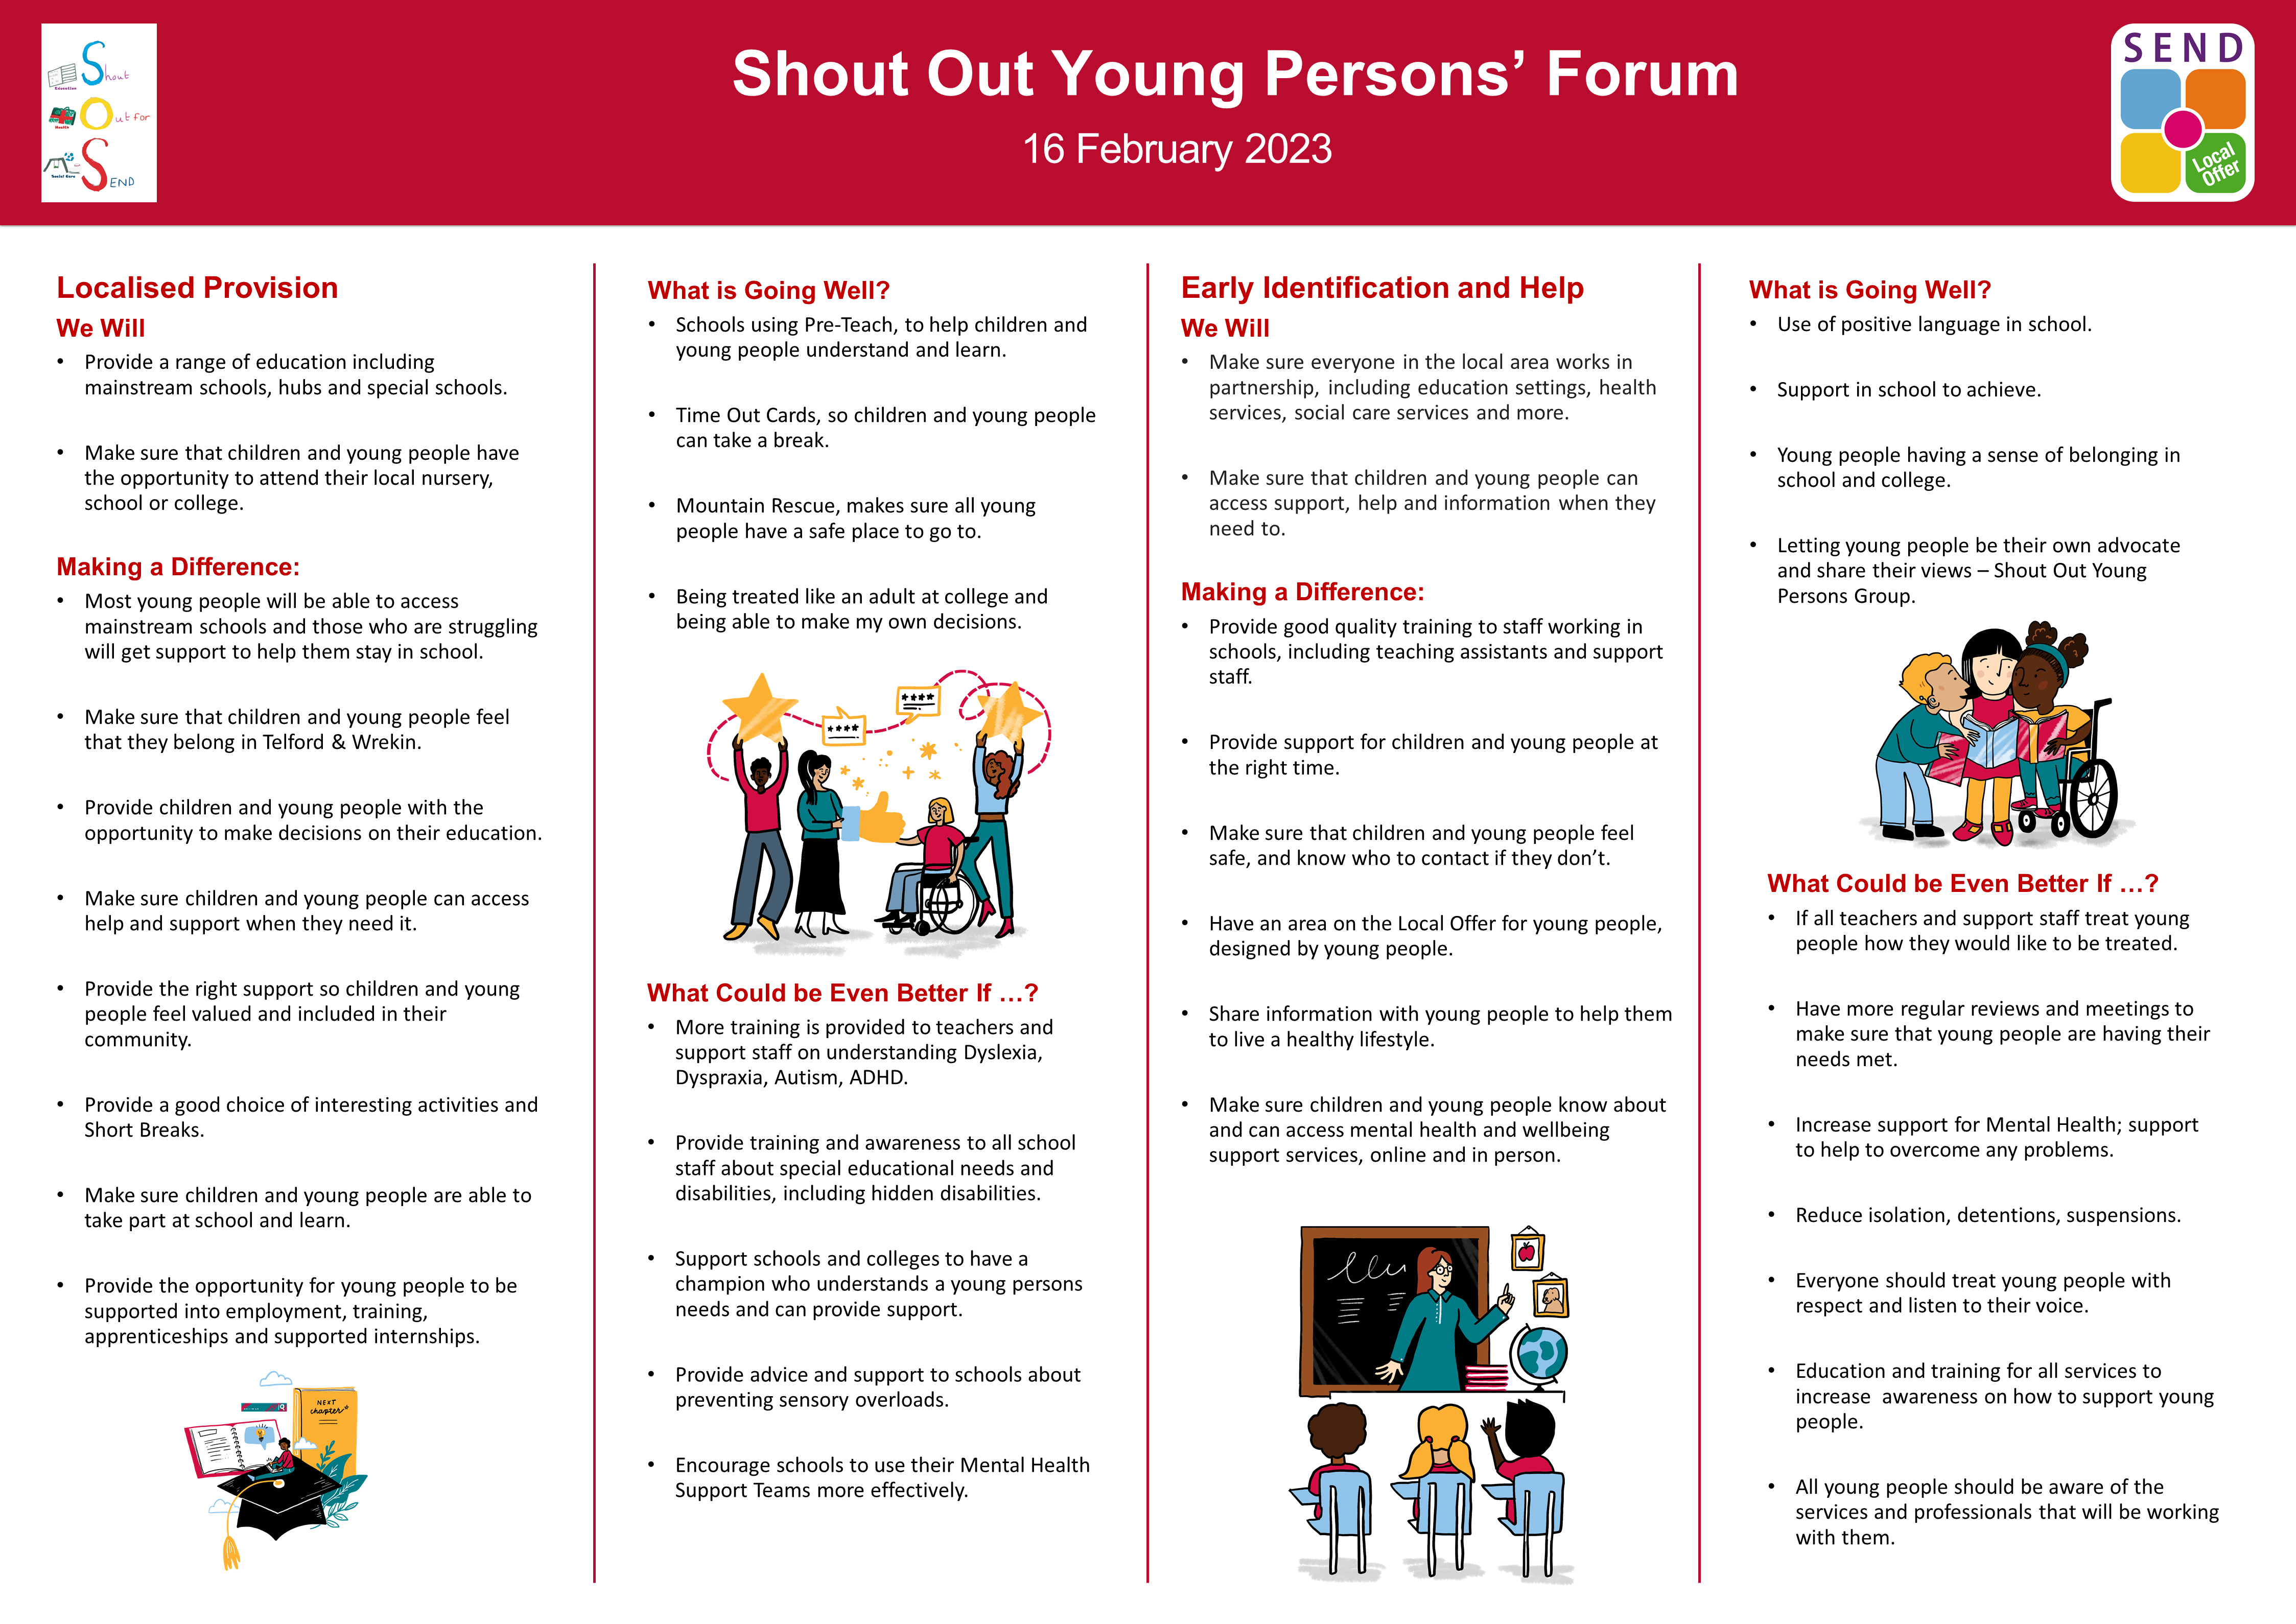 Shout out yp panel poster